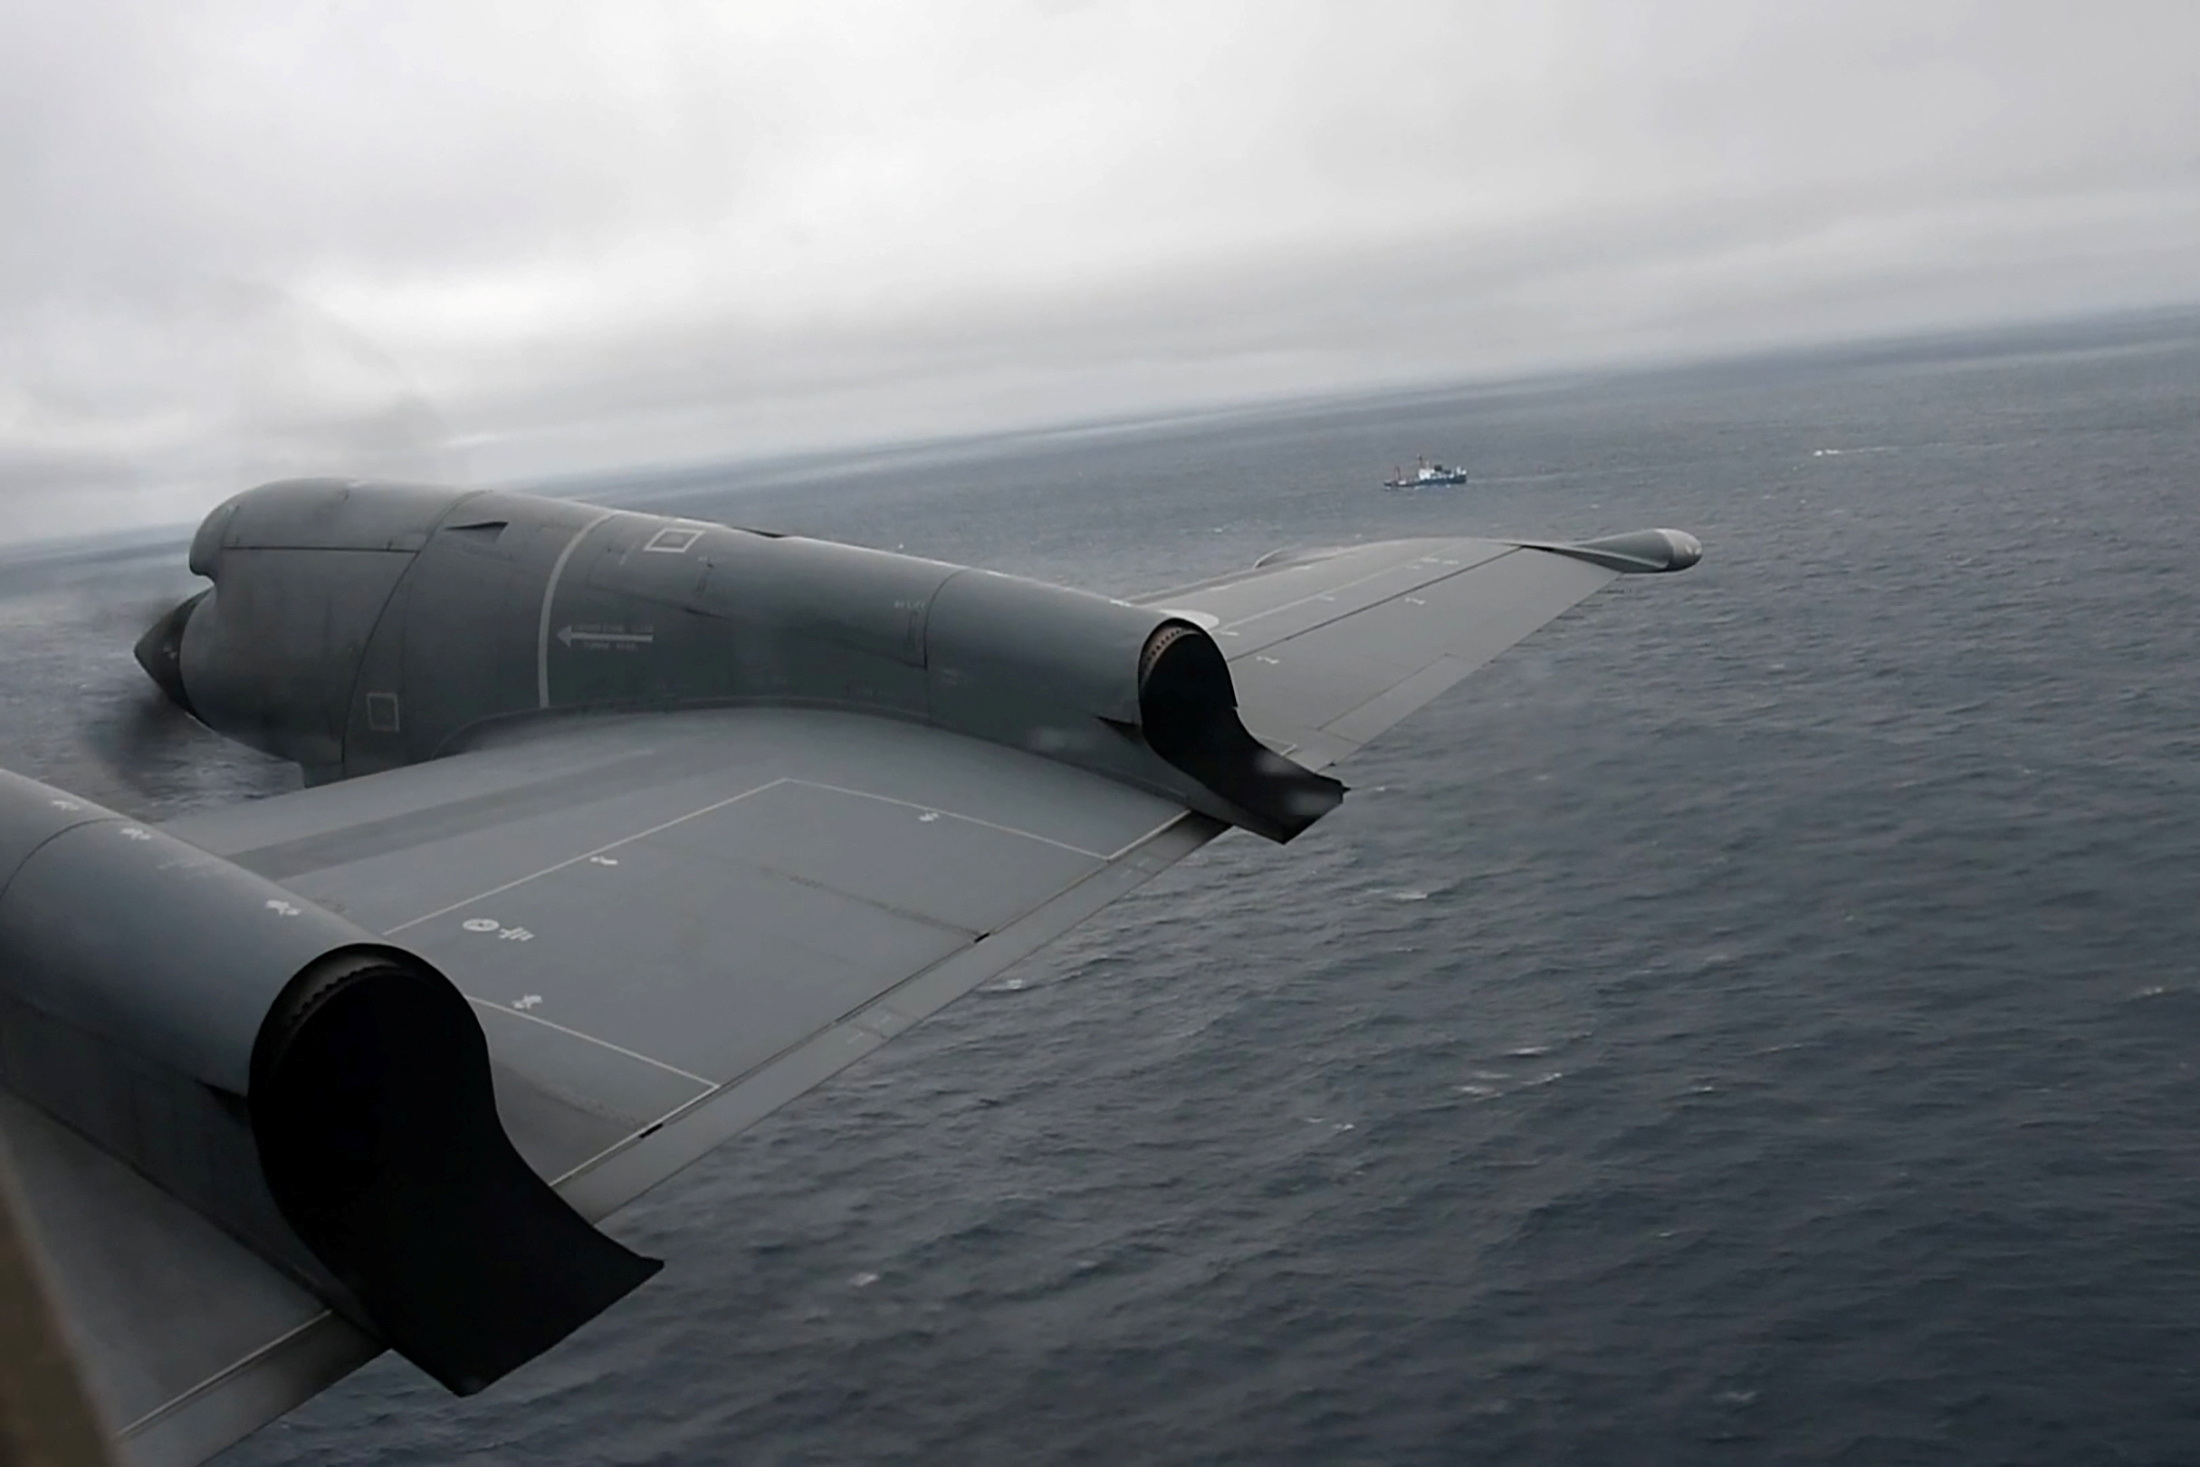 A Royal Canadian Air Force CP-140 Aurora maritime surveillance aircraft of 14 Wing flies a search pattern for the missing OceanGate submersible, which had been carrying five people to explore the wreck of the sunken SS Titanic, in the Atlantic Ocean off Newfoundland, Canada June 20, 2023 in a still image from video. Canadian Forces/Handout via REUTERS   THIS IMAGE HAS BEEN SUPPLIED BY A THIRD PARTY.